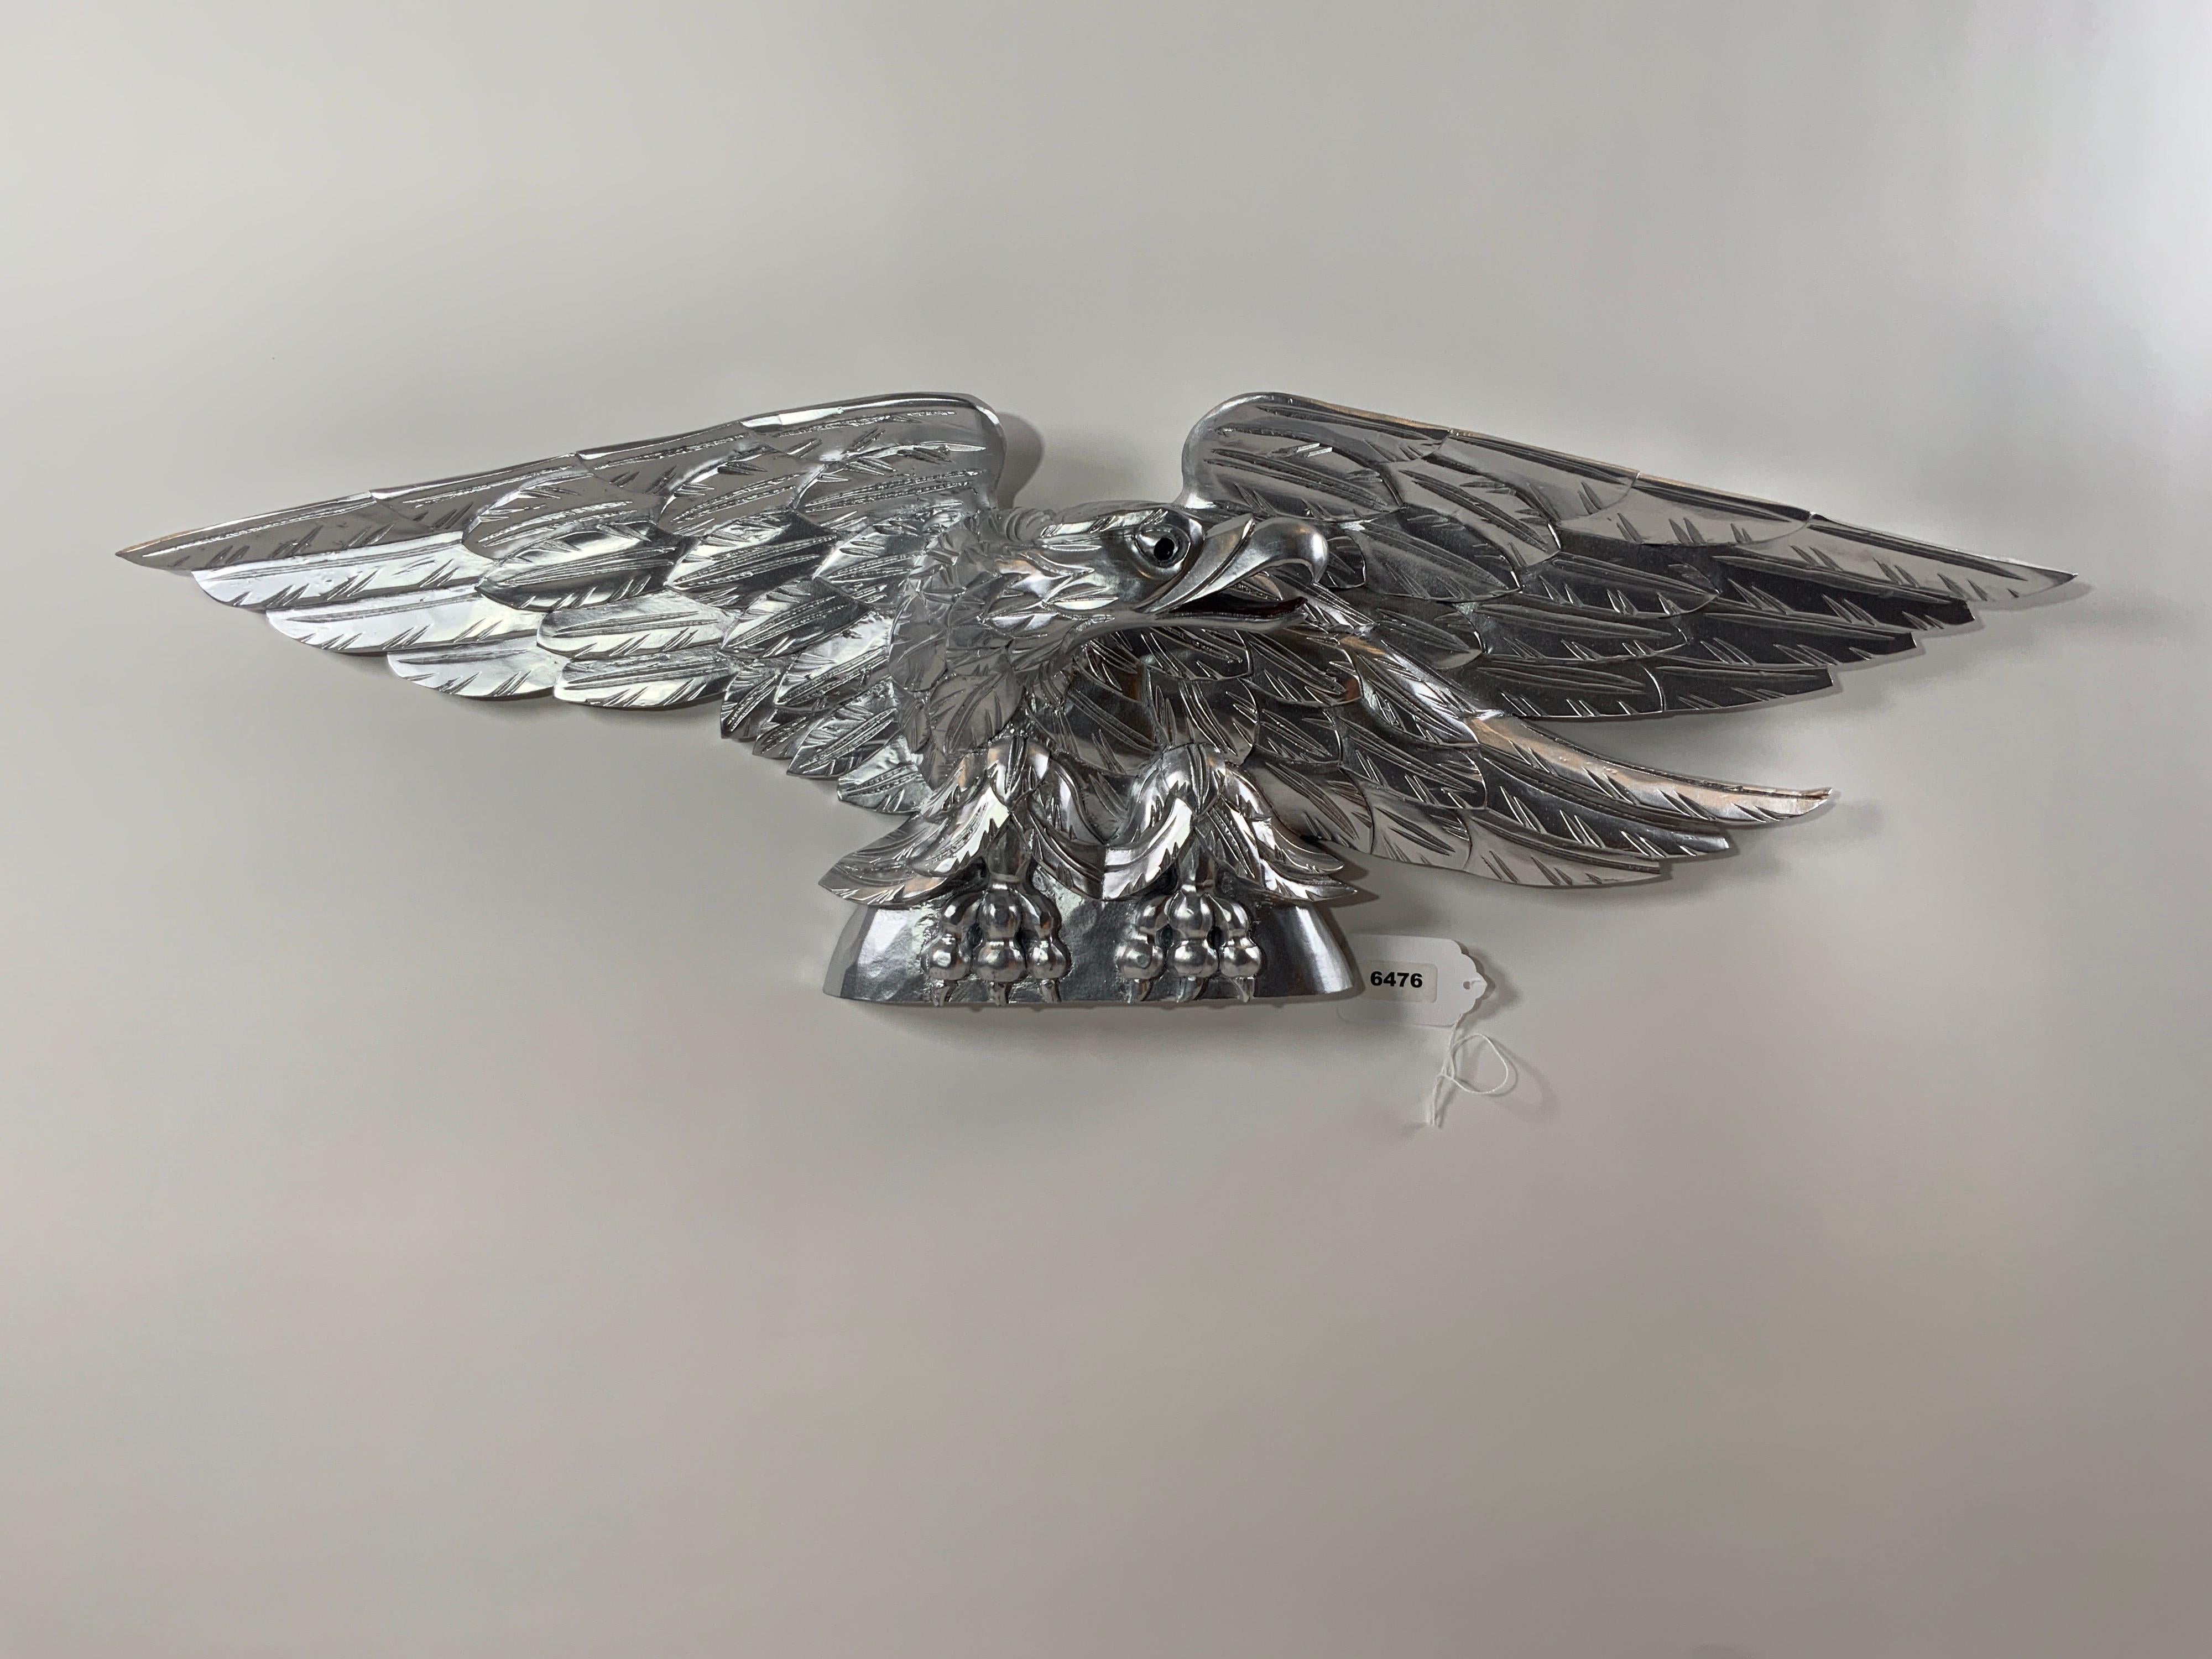 Carved eagle with pediment base. Heavily carved wings. Expertly executed. Flat bottom. Can be displayed on a mantle, over a door, or hung. Silver painted finish.

Overall Dimensions: 11